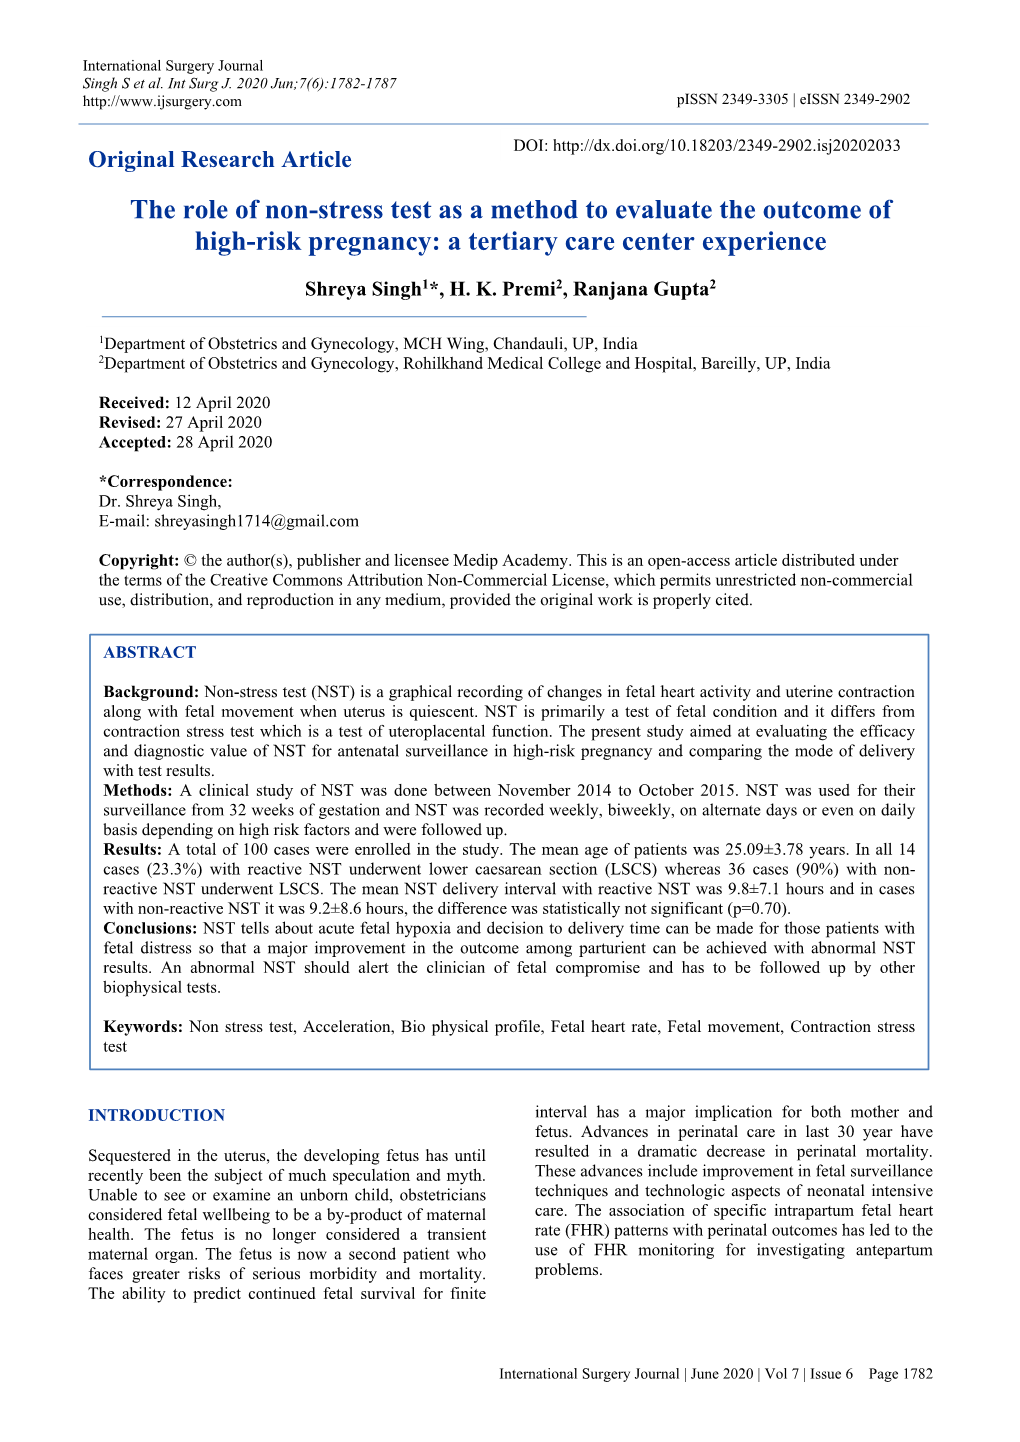 The Role of Non-Stress Test As a Method to Evaluate the Outcome of High-Risk Pregnancy: a Tertiary Care Center Experience